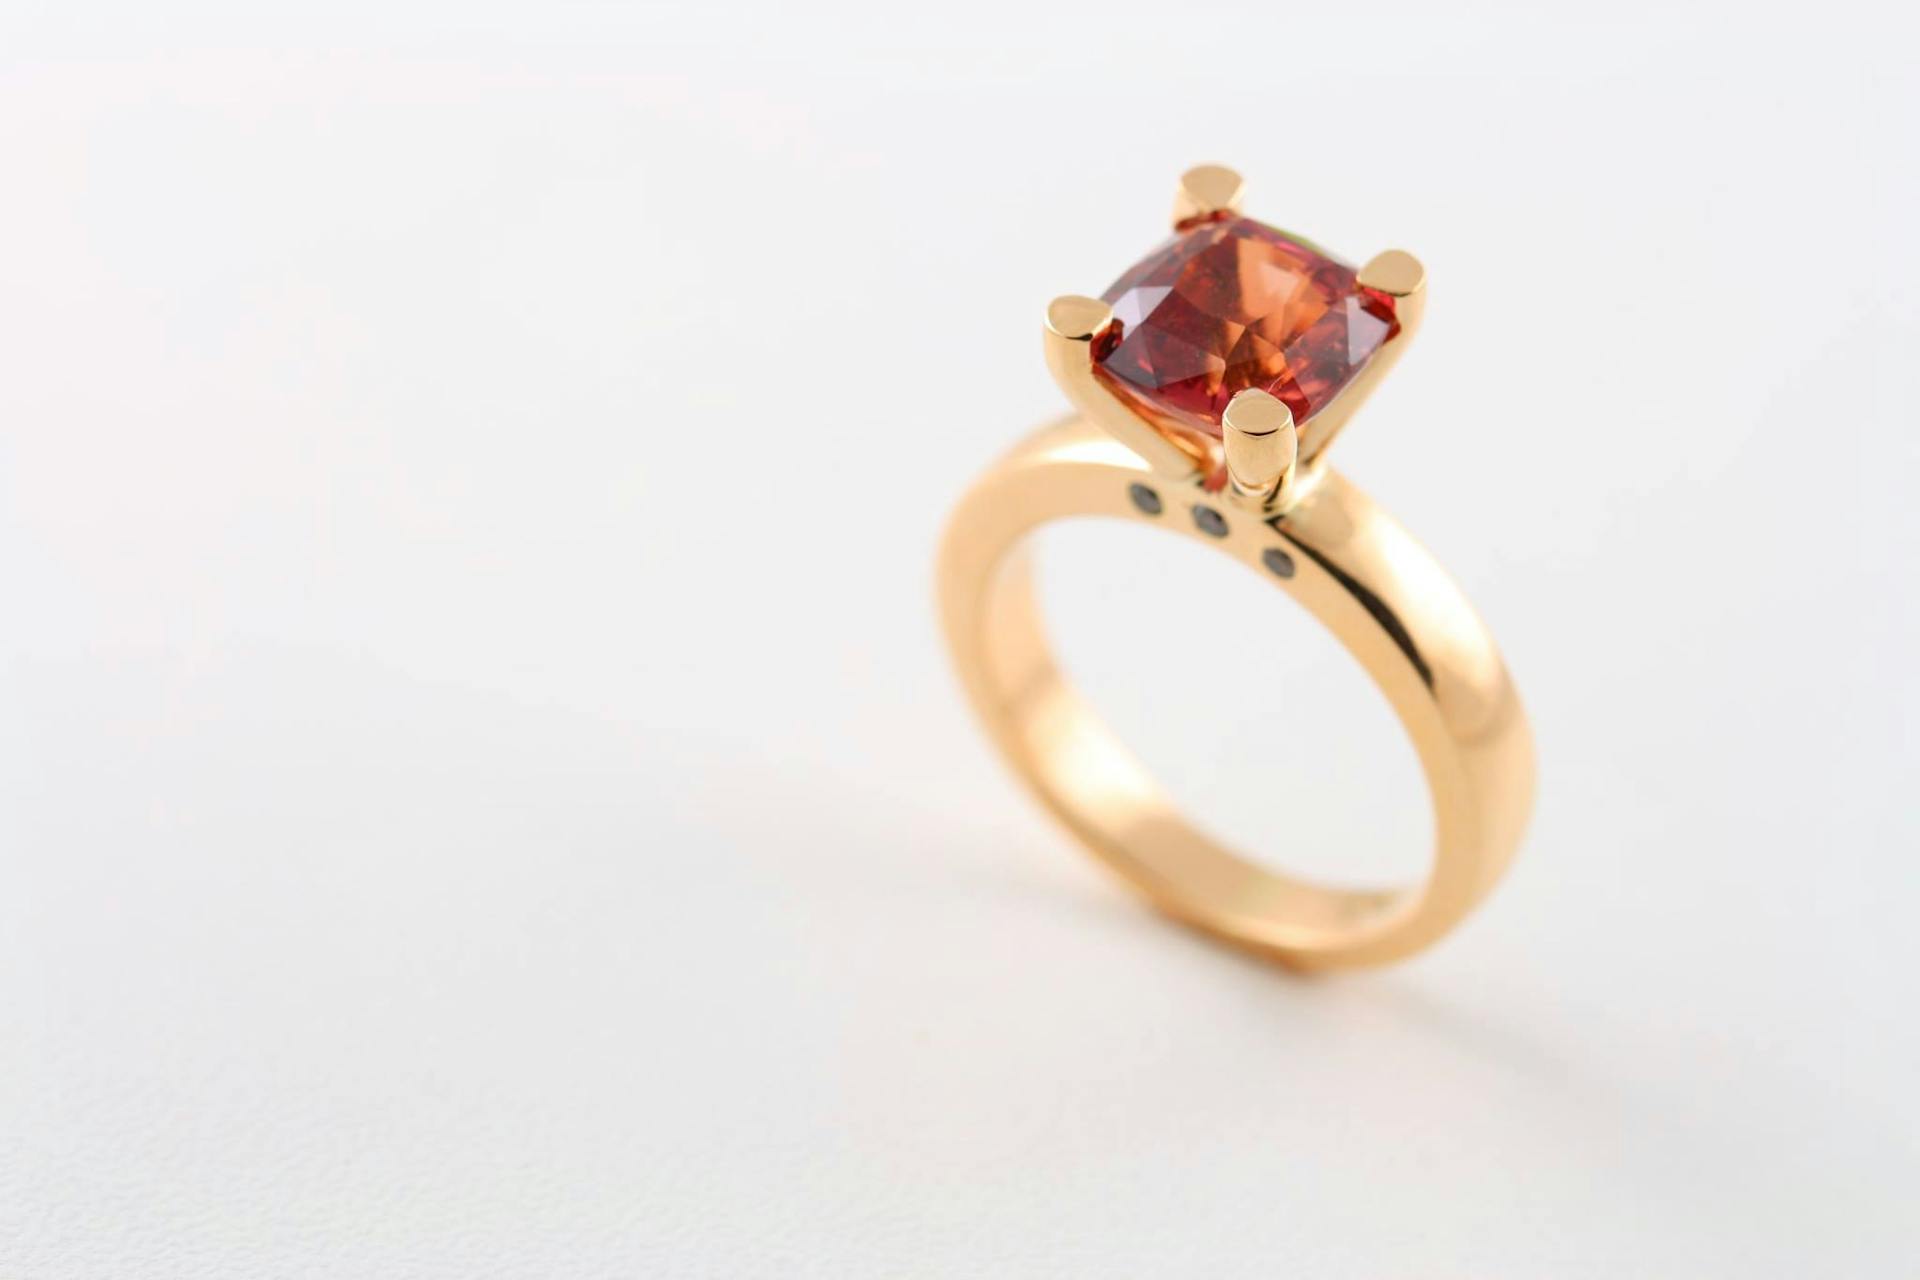 padparadscha sapphire buying guide - 4.73ct padparadscha ring